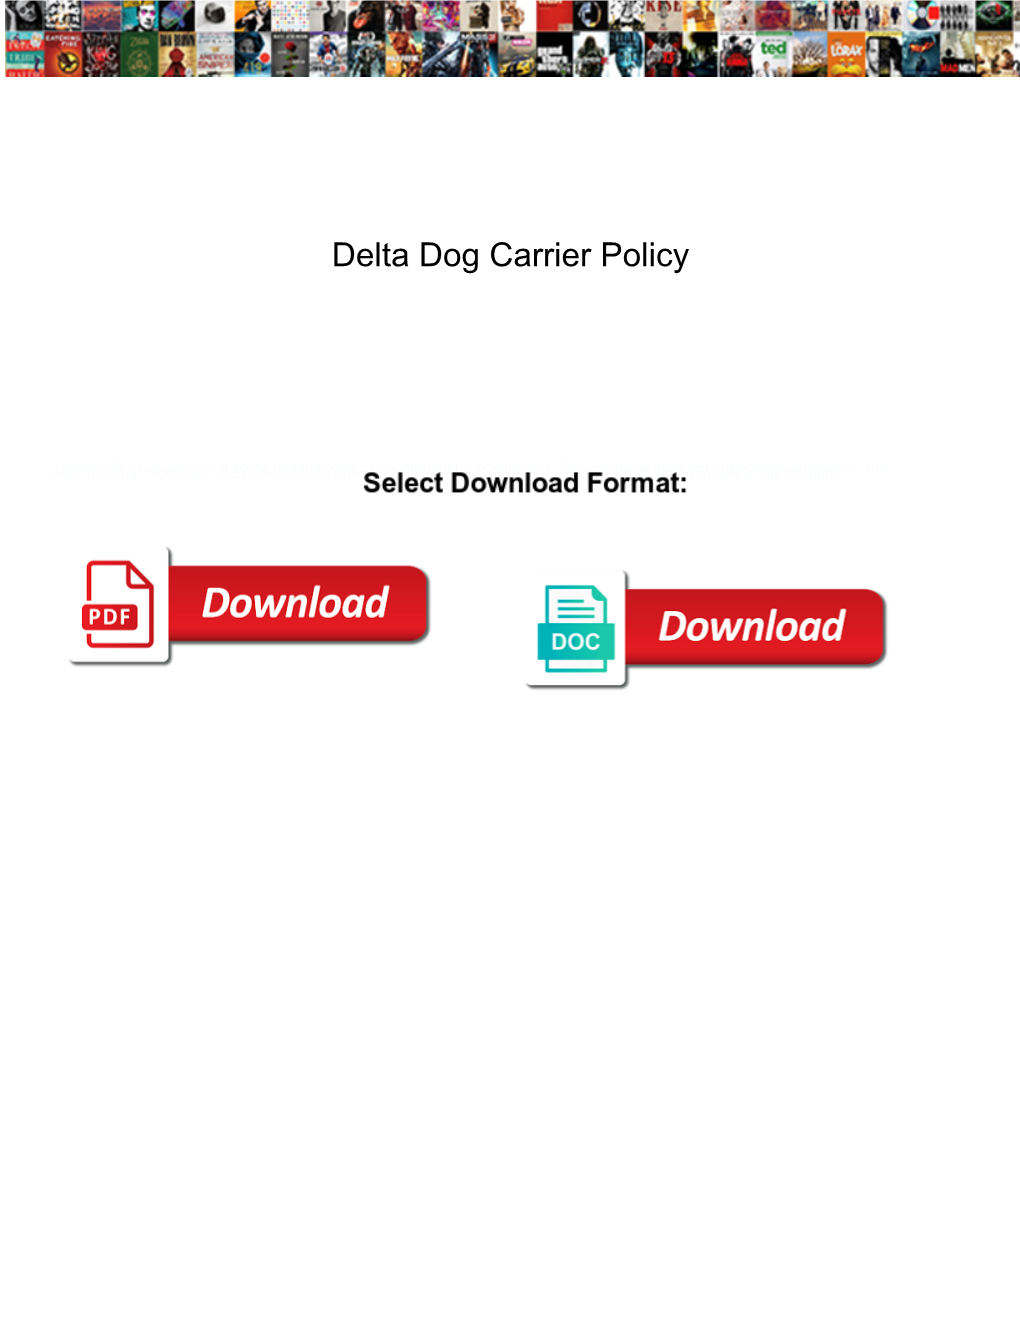 Delta Dog Carrier Policy